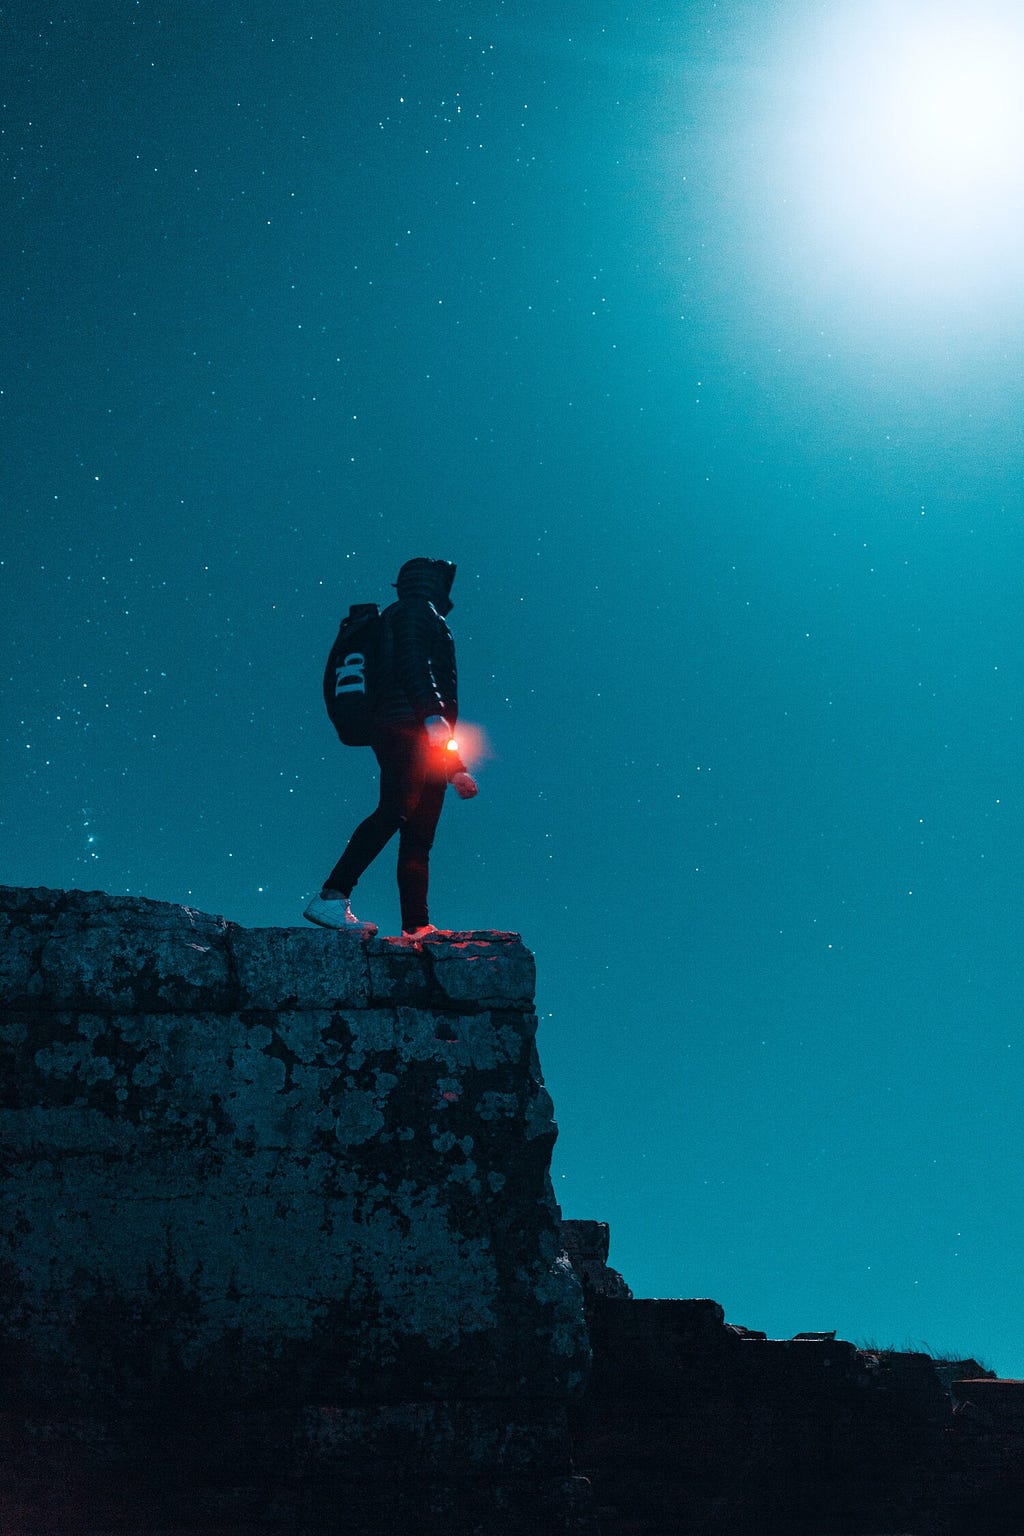 A man on a cliff looking at the night sky witha red glowing beacon in his hand